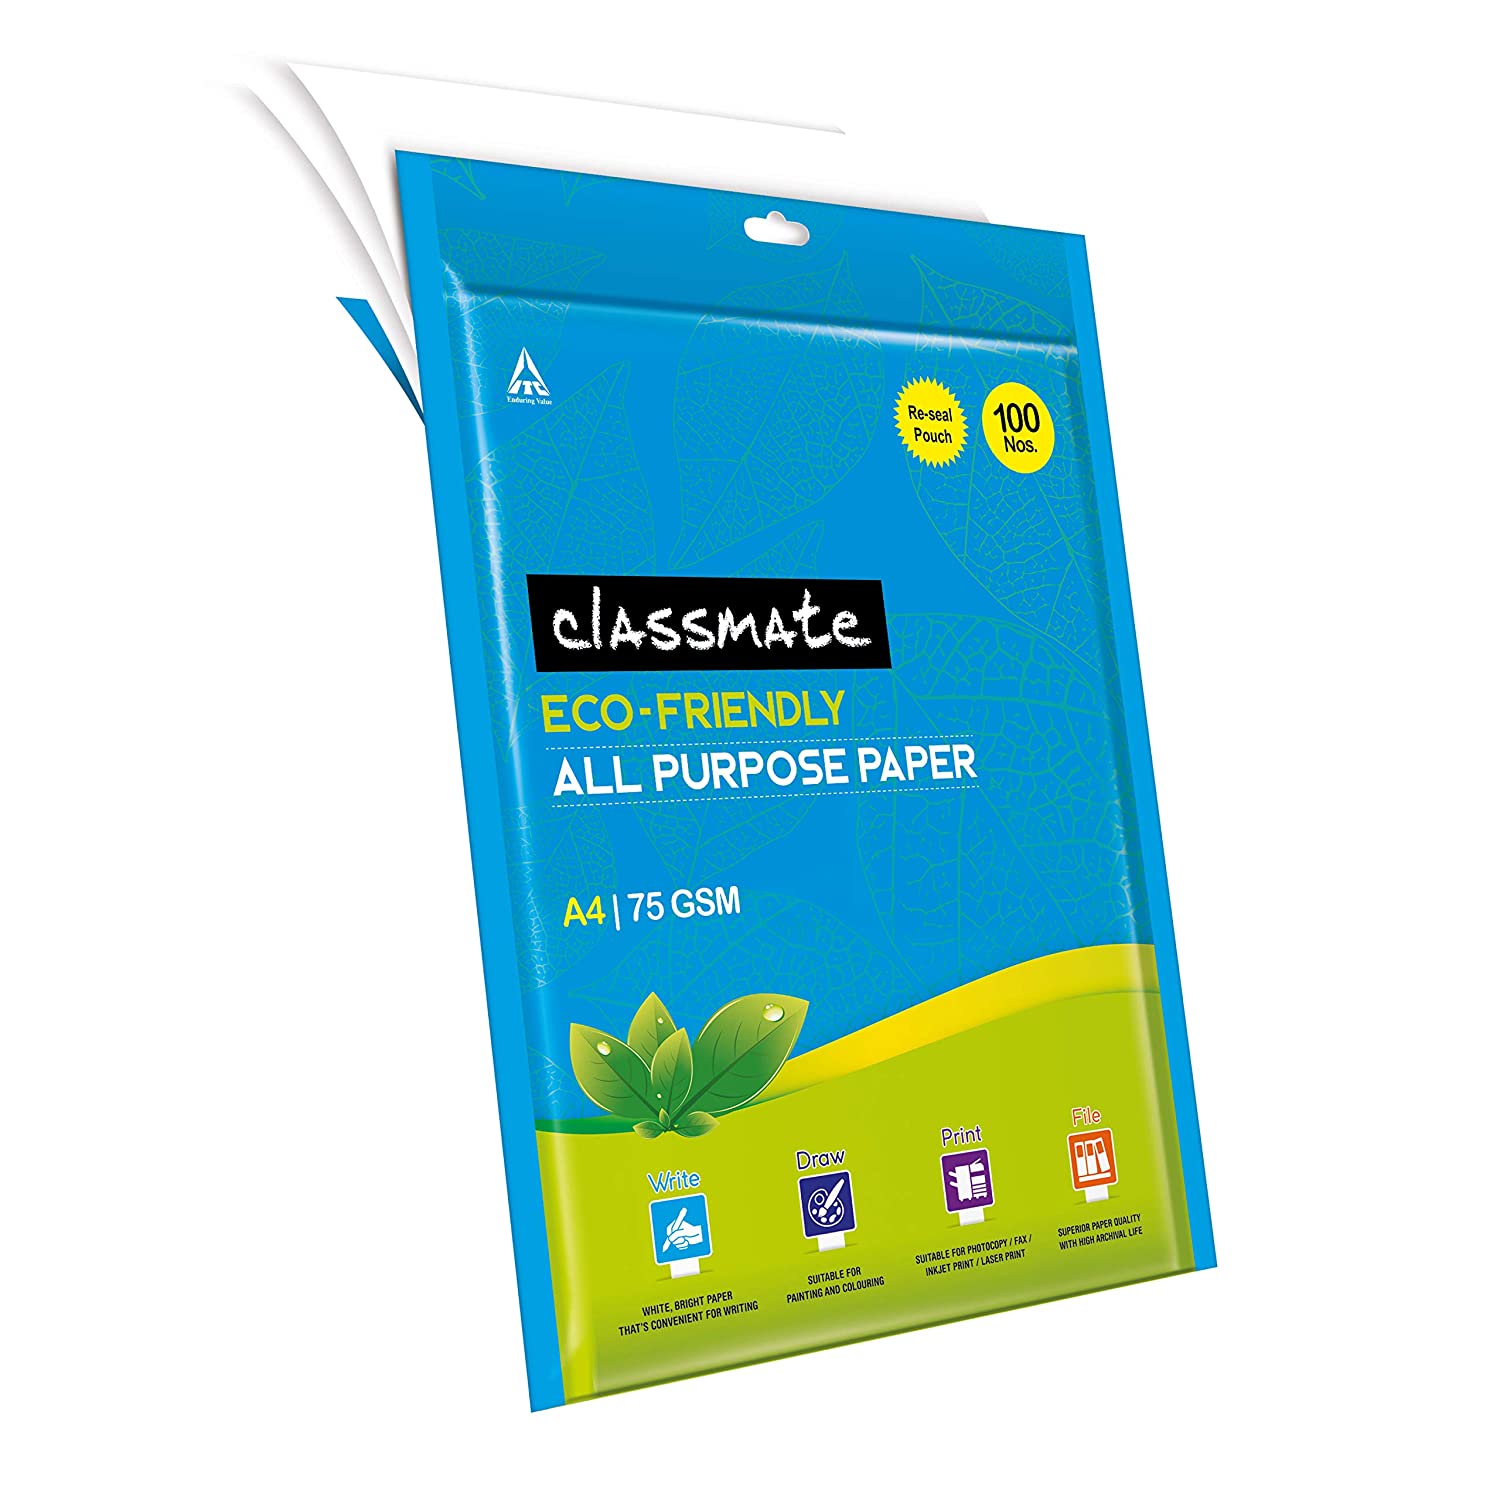 Classmate A4 Size all purpose paper - White, Unruled, Pack of 100